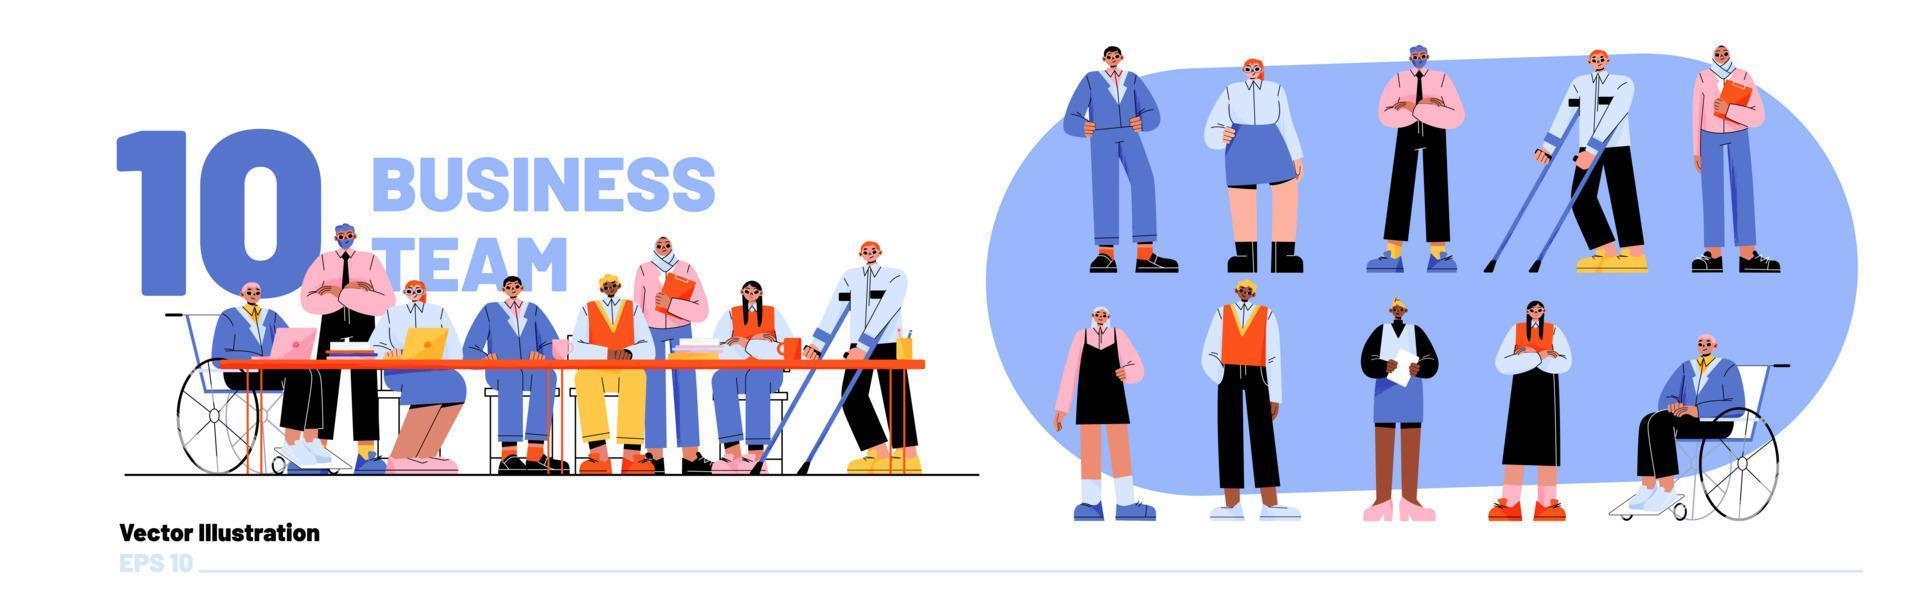 Business team set with diverse people vector